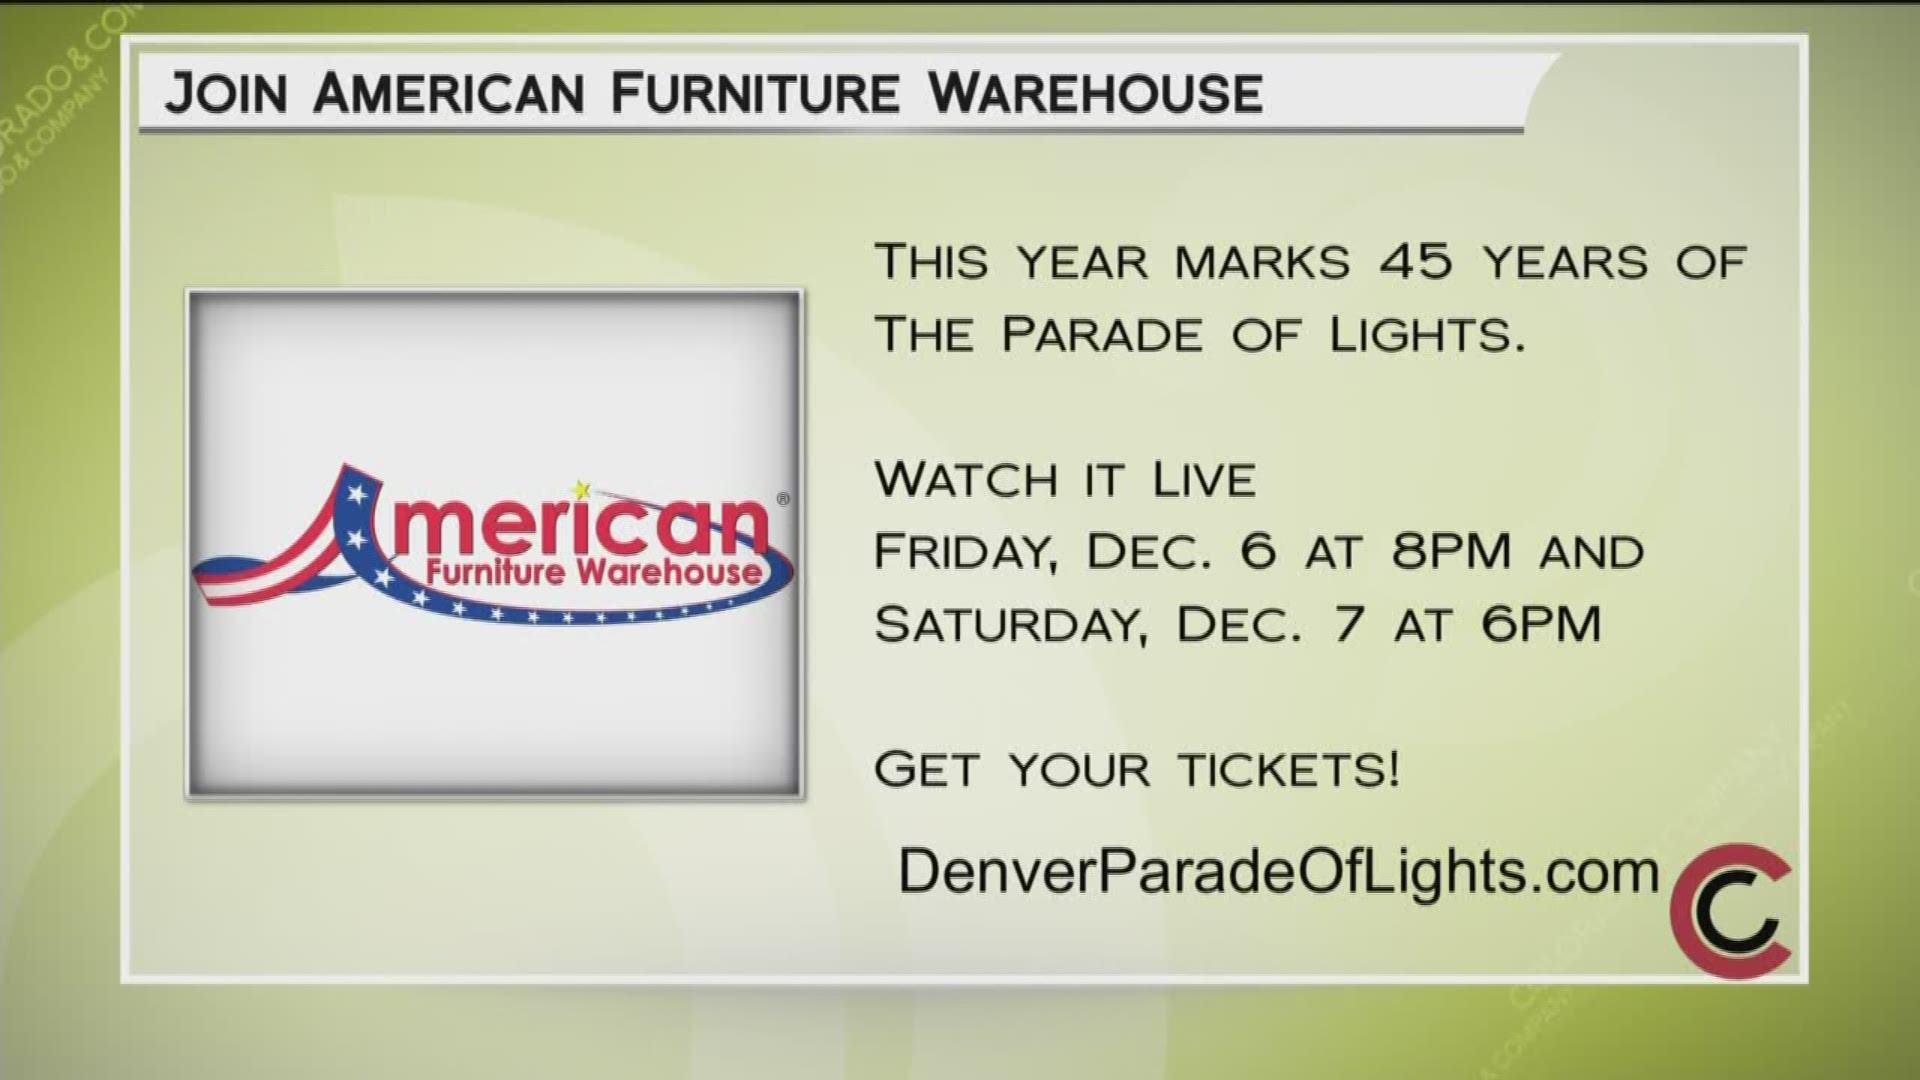 Join American Furniture Warehouse at the 9News Parade of Lights on Friday, December 6th. Thanks to AFW for their continued support.